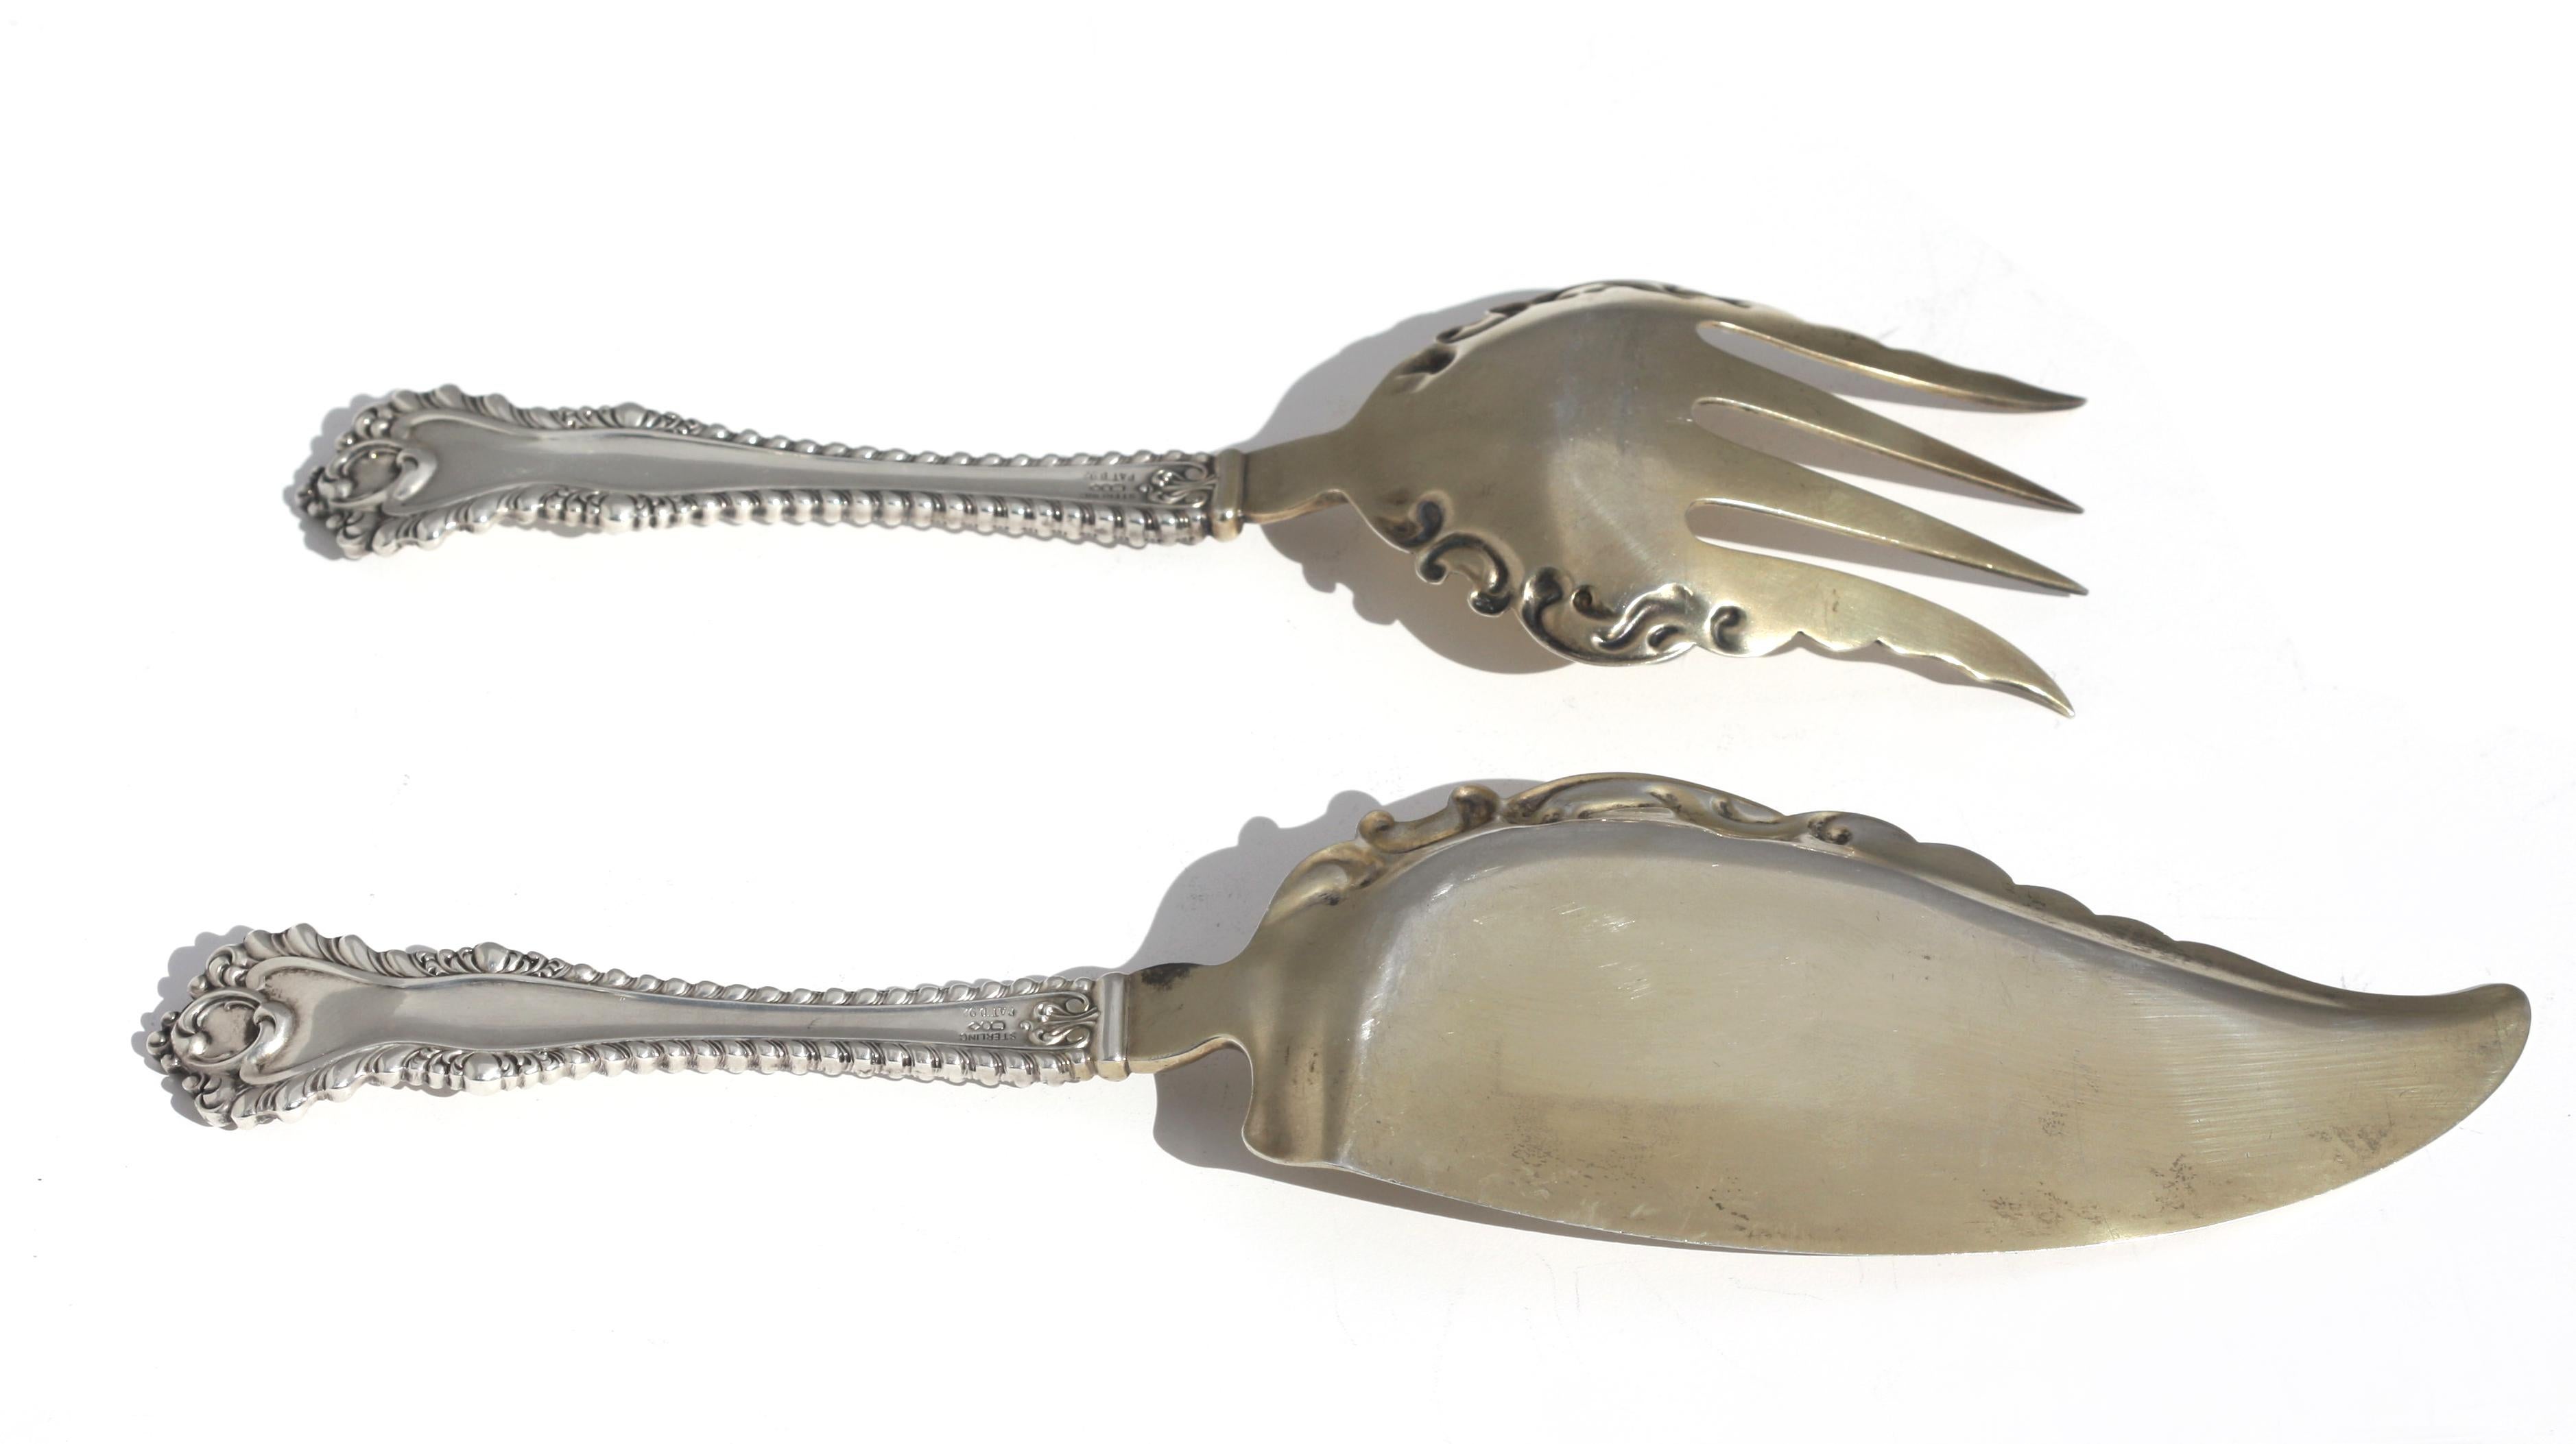 
Pair of American Sterling Silver Serving Pieces
Early to mid-20th Century. Marked Sterling, Pat. D92, with three open geometric-shaped cartouches. Comprising a fork and a fish/cake slice, with remnants of a partially gilt wash.
Length 8.5 in., 11